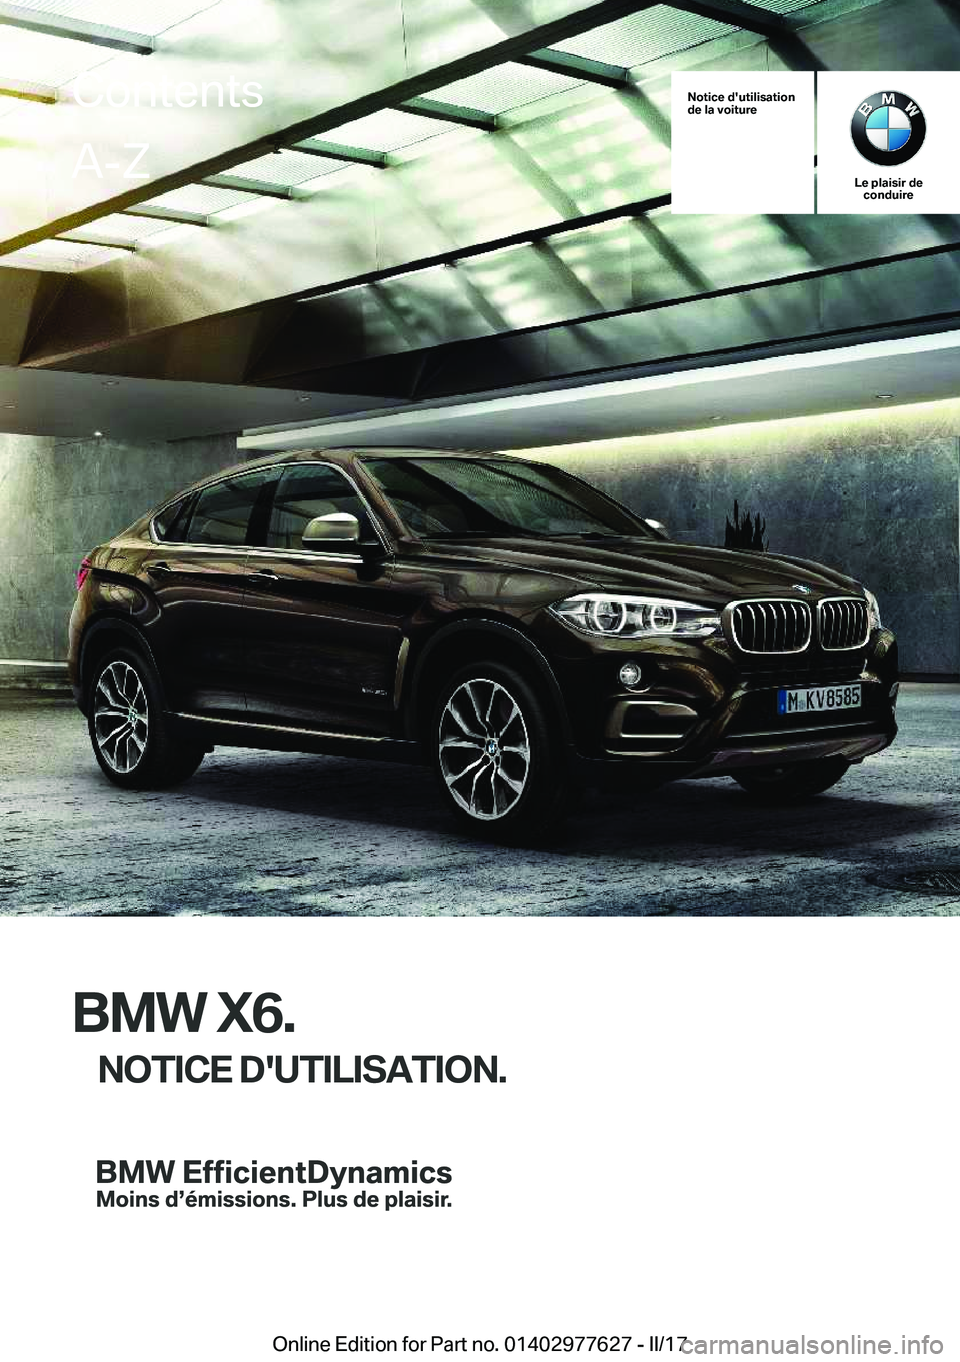 BMW X6 2017  Notices Demploi (in French) �N�o�t�i�c�e��d�'�u�t�i�l�i�s�a�t�i�o�n
�d�e��l�a��v�o�i�t�u�r�e
�L�e��p�l�a�i�s�i�r��d�e �c�o�n�d�u�i�r�e
�B�M�W��X�6�.
�N�O�T�I�C�E��D�'�U�T�I�L�I�S�A�T�I�O�N�.
�C�o�n�t�e�n�t�s�A�-�Z